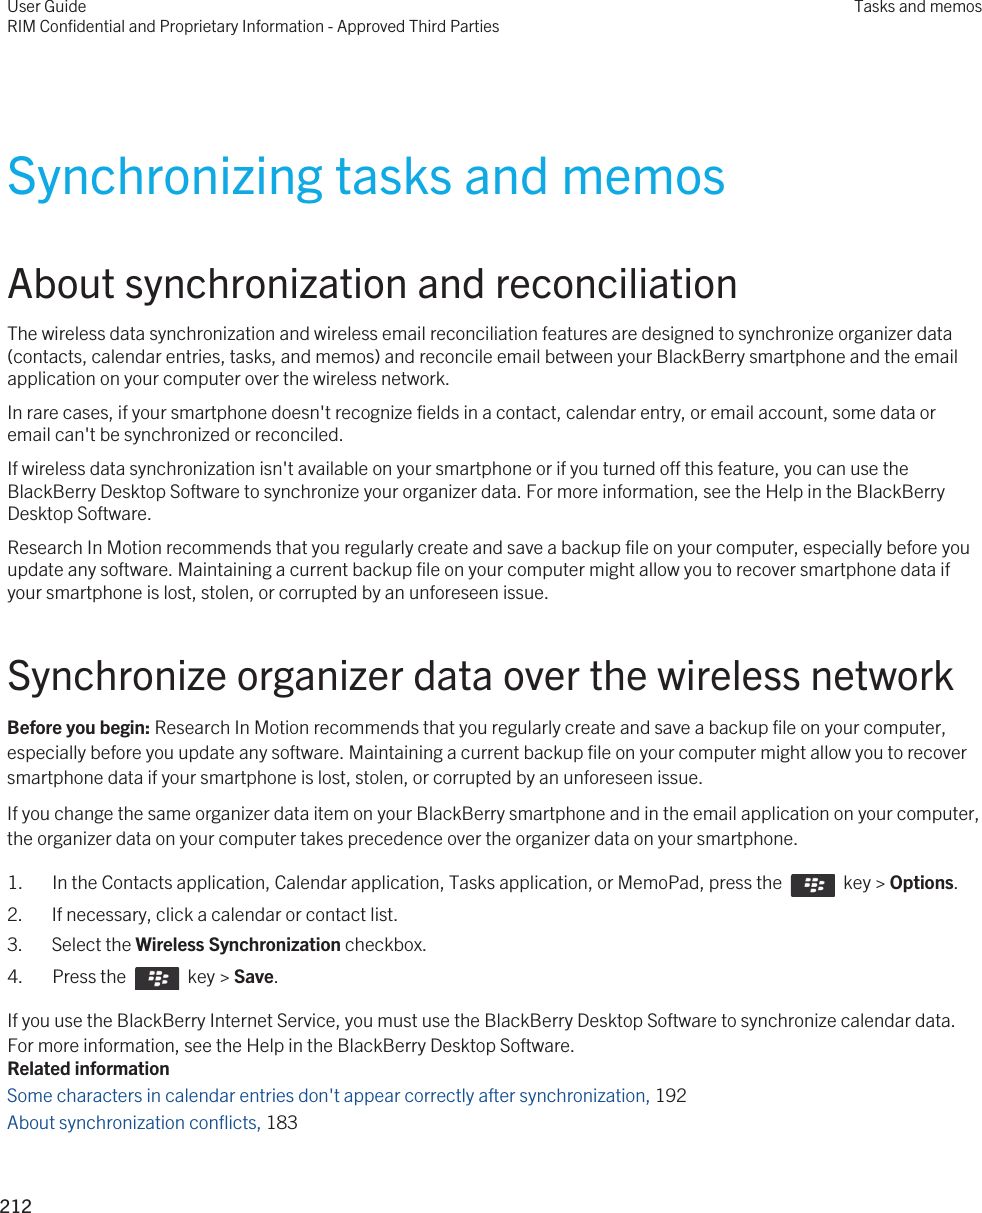 Synchronizing tasks and memosAbout synchronization and reconciliationThe wireless data synchronization and wireless email reconciliation features are designed to synchronize organizer data (contacts, calendar entries, tasks, and memos) and reconcile email between your BlackBerry smartphone and the email application on your computer over the wireless network.In rare cases, if your smartphone doesn&apos;t recognize fields in a contact, calendar entry, or email account, some data or email can&apos;t be synchronized or reconciled.If wireless data synchronization isn&apos;t available on your smartphone or if you turned off this feature, you can use the BlackBerry Desktop Software to synchronize your organizer data. For more information, see the Help in the BlackBerry Desktop Software.Research In Motion recommends that you regularly create and save a backup file on your computer, especially before you update any software. Maintaining a current backup file on your computer might allow you to recover smartphone data if your smartphone is lost, stolen, or corrupted by an unforeseen issue.Synchronize organizer data over the wireless networkBefore you begin: Research In Motion recommends that you regularly create and save a backup file on your computer, especially before you update any software. Maintaining a current backup file on your computer might allow you to recover smartphone data if your smartphone is lost, stolen, or corrupted by an unforeseen issue.If you change the same organizer data item on your BlackBerry smartphone and in the email application on your computer, the organizer data on your computer takes precedence over the organizer data on your smartphone.1.  In the Contacts application, Calendar application, Tasks application, or MemoPad, press the    key &gt; Options. 2. If necessary, click a calendar or contact list.3. Select the Wireless Synchronization checkbox.4.  Press the    key &gt; Save. If you use the BlackBerry Internet Service, you must use the BlackBerry Desktop Software to synchronize calendar data. For more information, see the Help in the BlackBerry Desktop Software.Related informationSome characters in calendar entries don&apos;t appear correctly after synchronization, 192 About synchronization conflicts, 183 User GuideRIM Confidential and Proprietary Information - Approved Third PartiesTasks and memos212 